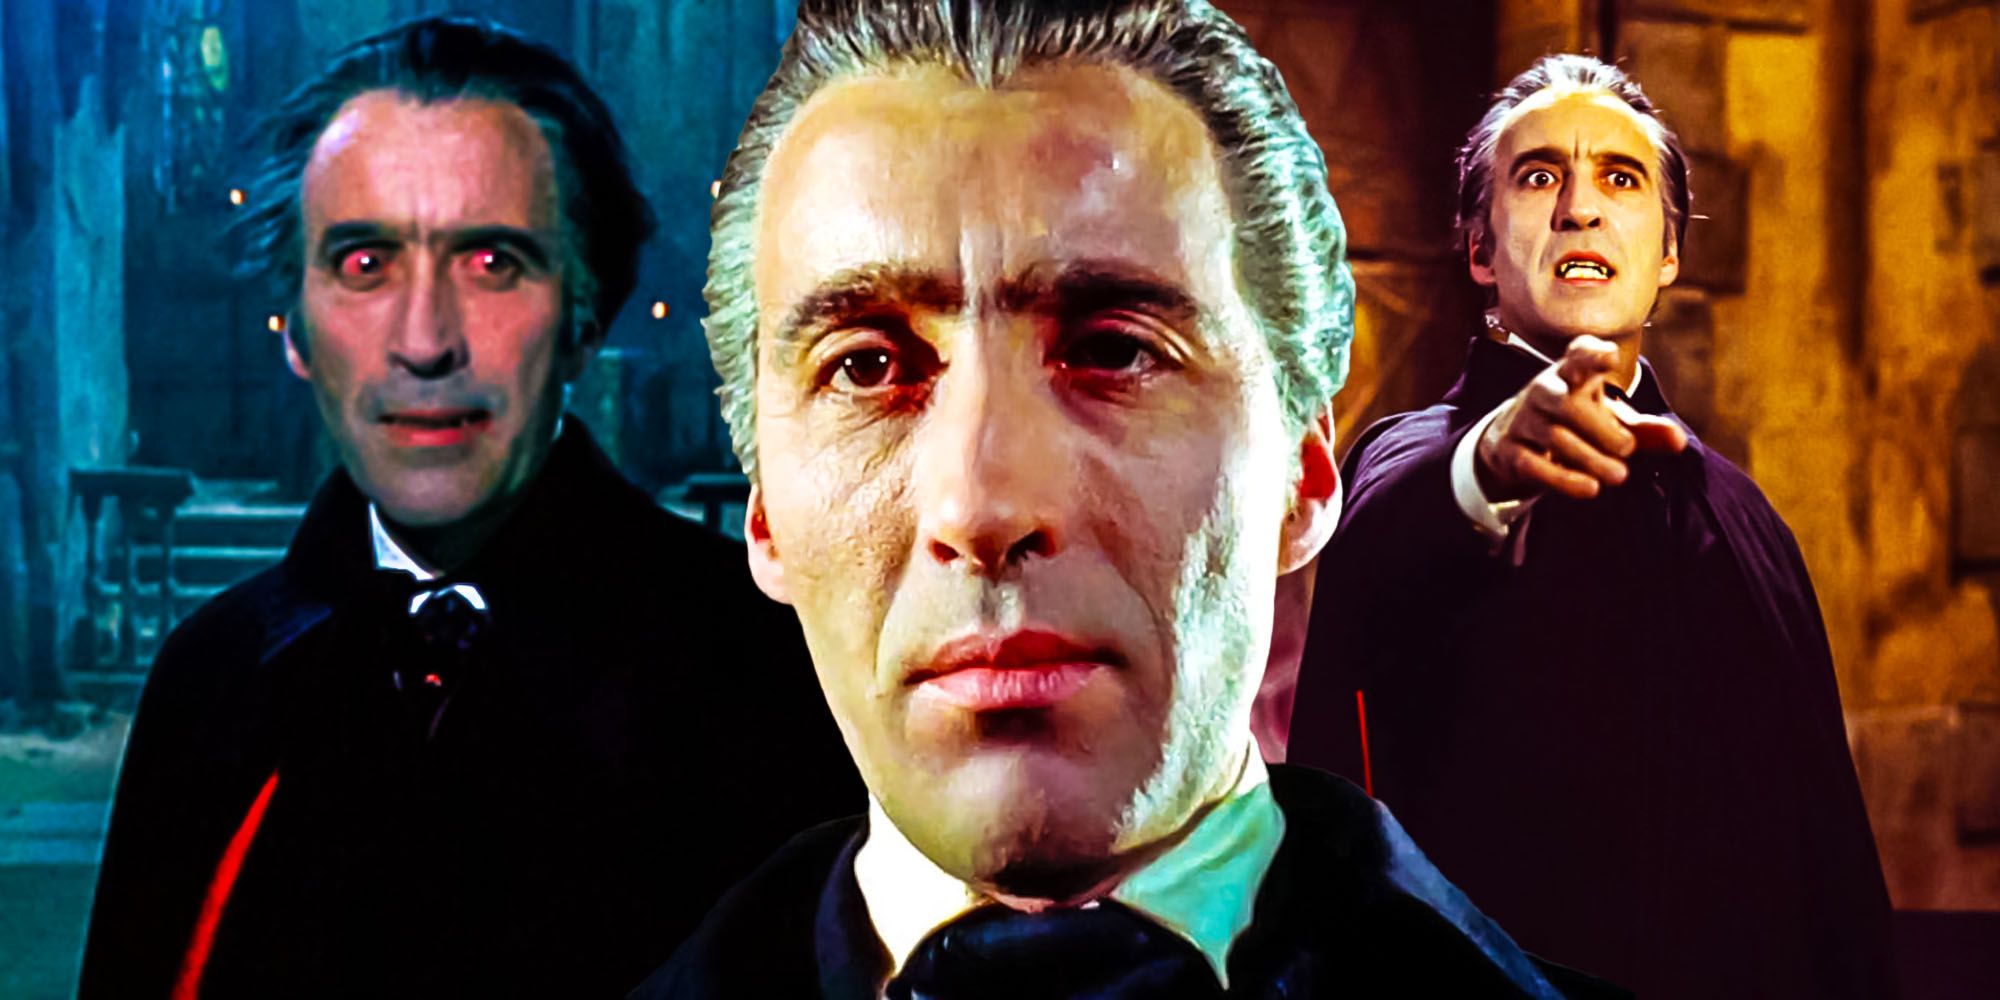 Year Christopher Lee played Dracula 4 times